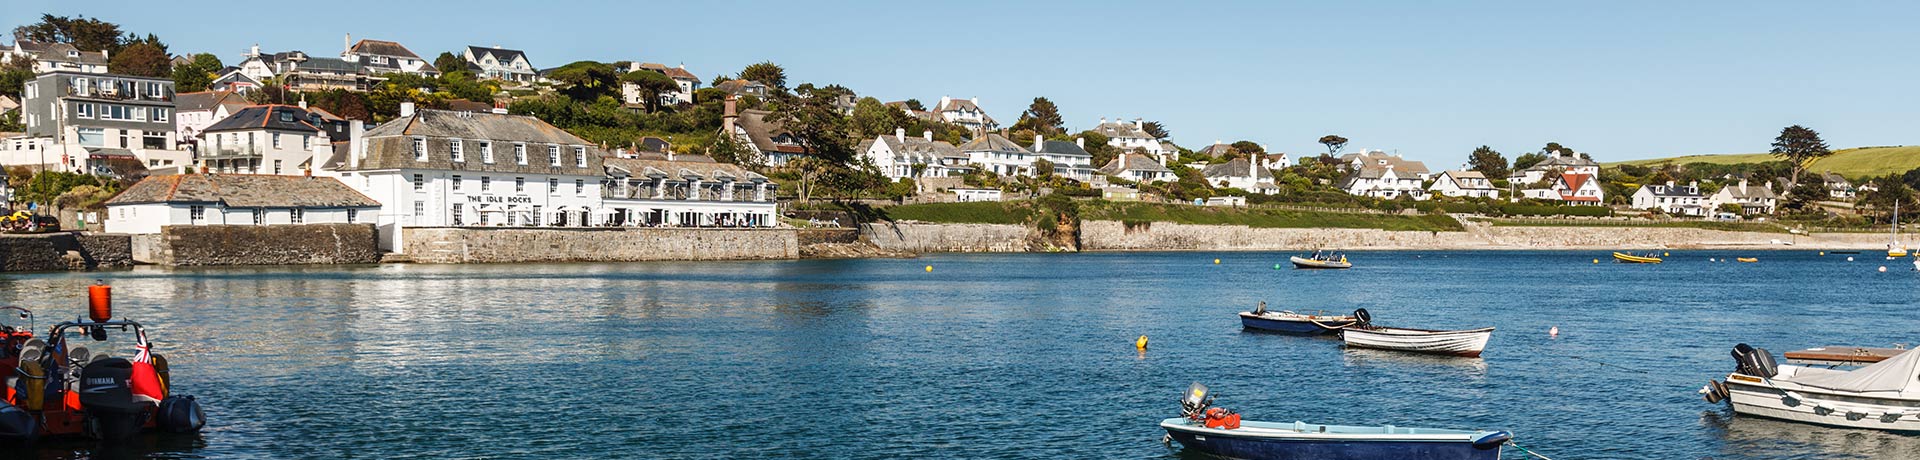 Things to do in St Mawes